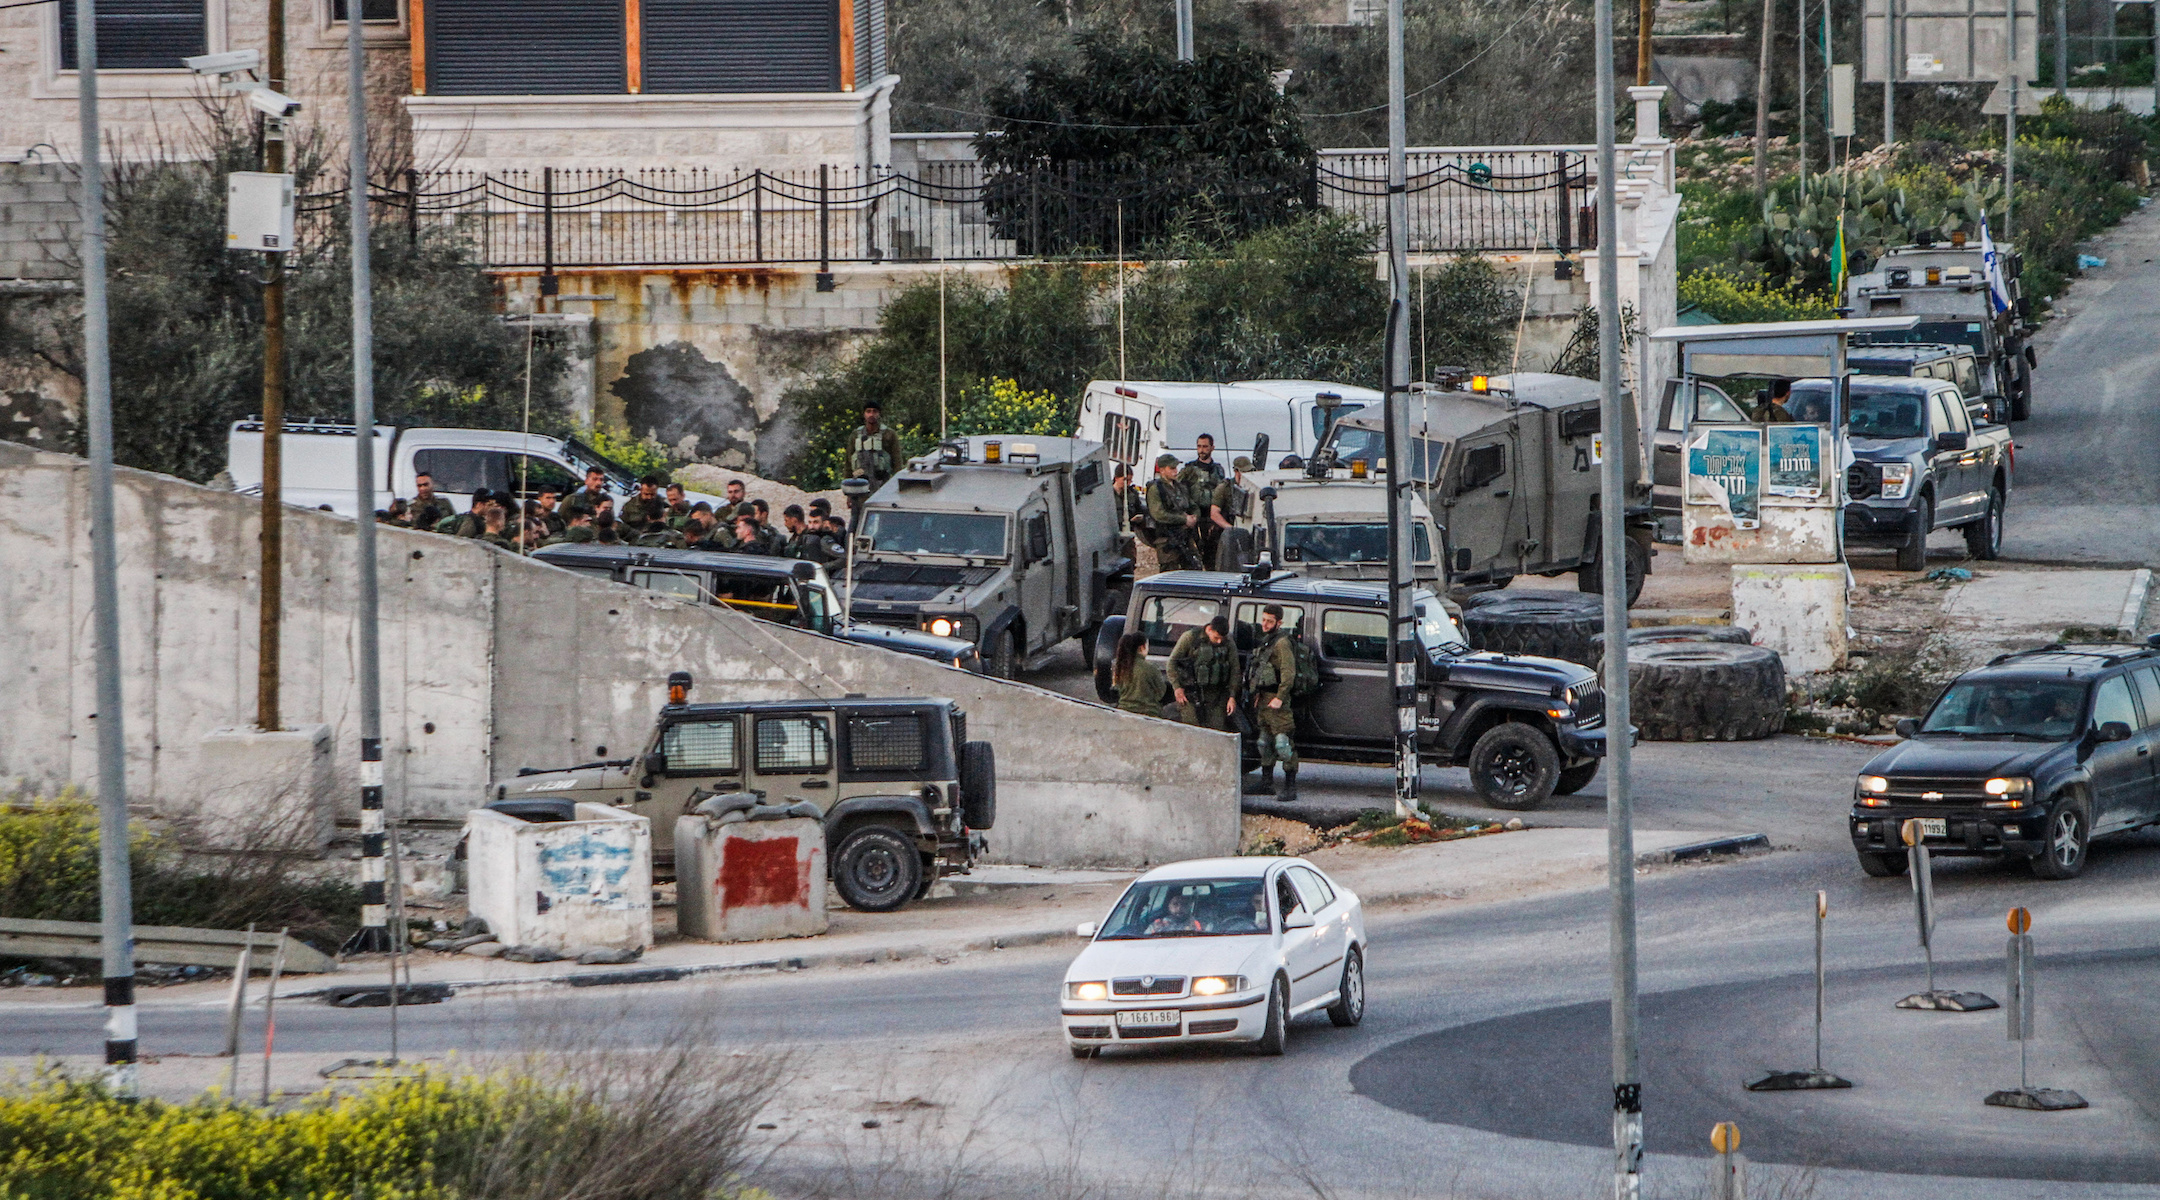 Israeli forces deploy in the area around Huwara following a previous shooting attack there. (Nasser Ishtayeh/SOPA Images/LightRocket via Getty Images)